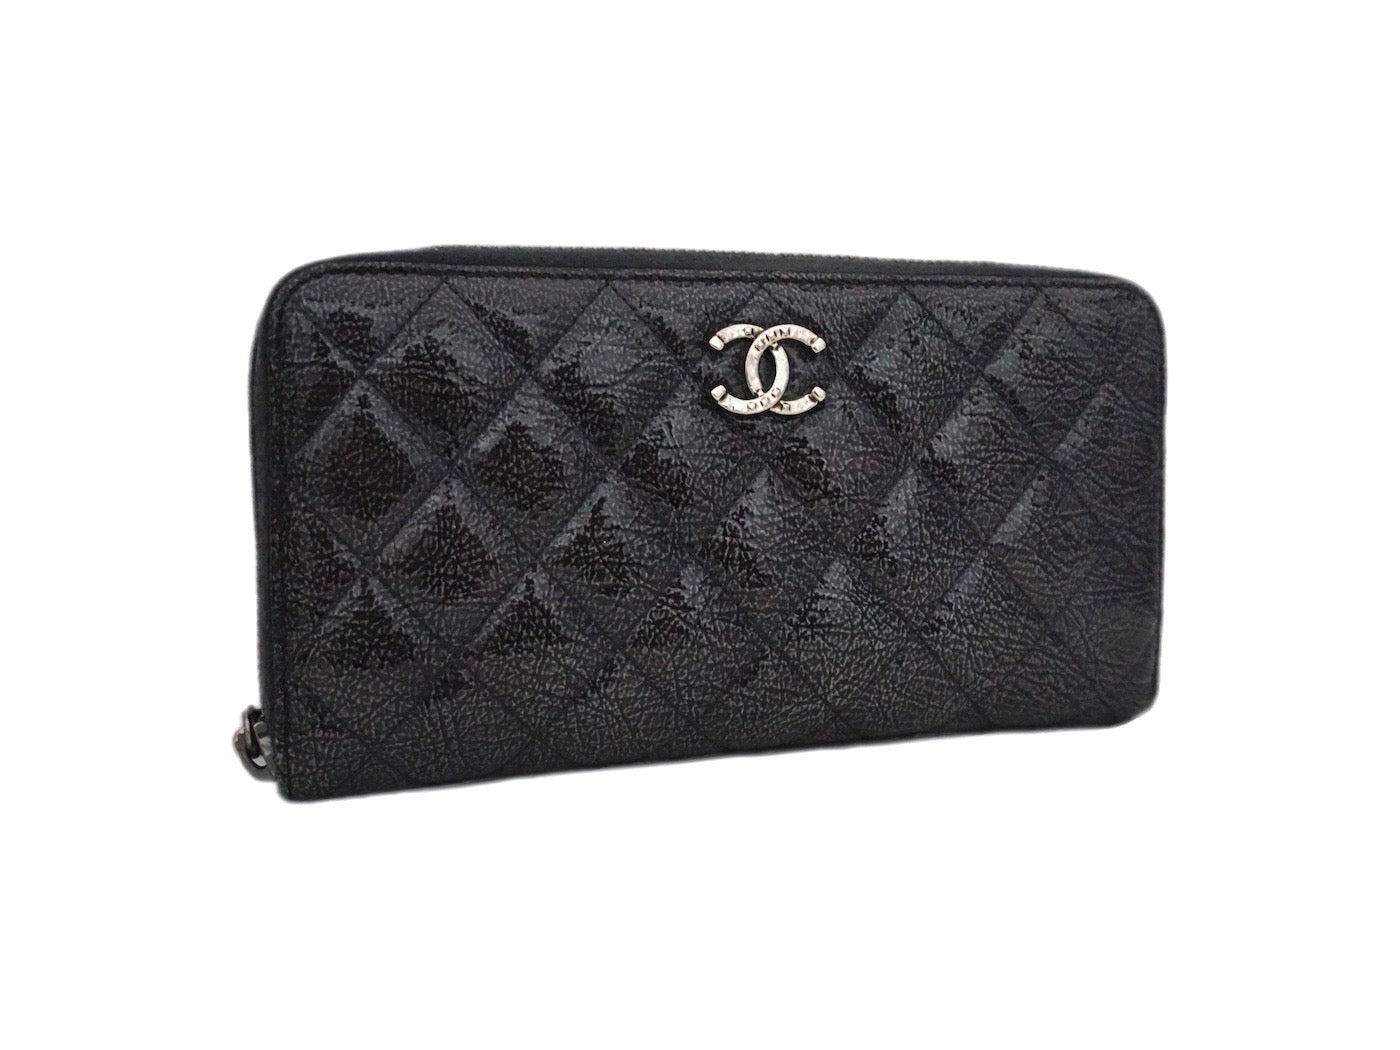 Authentic Chanel Grey Quilted Crinkled Patent Leather Wallet